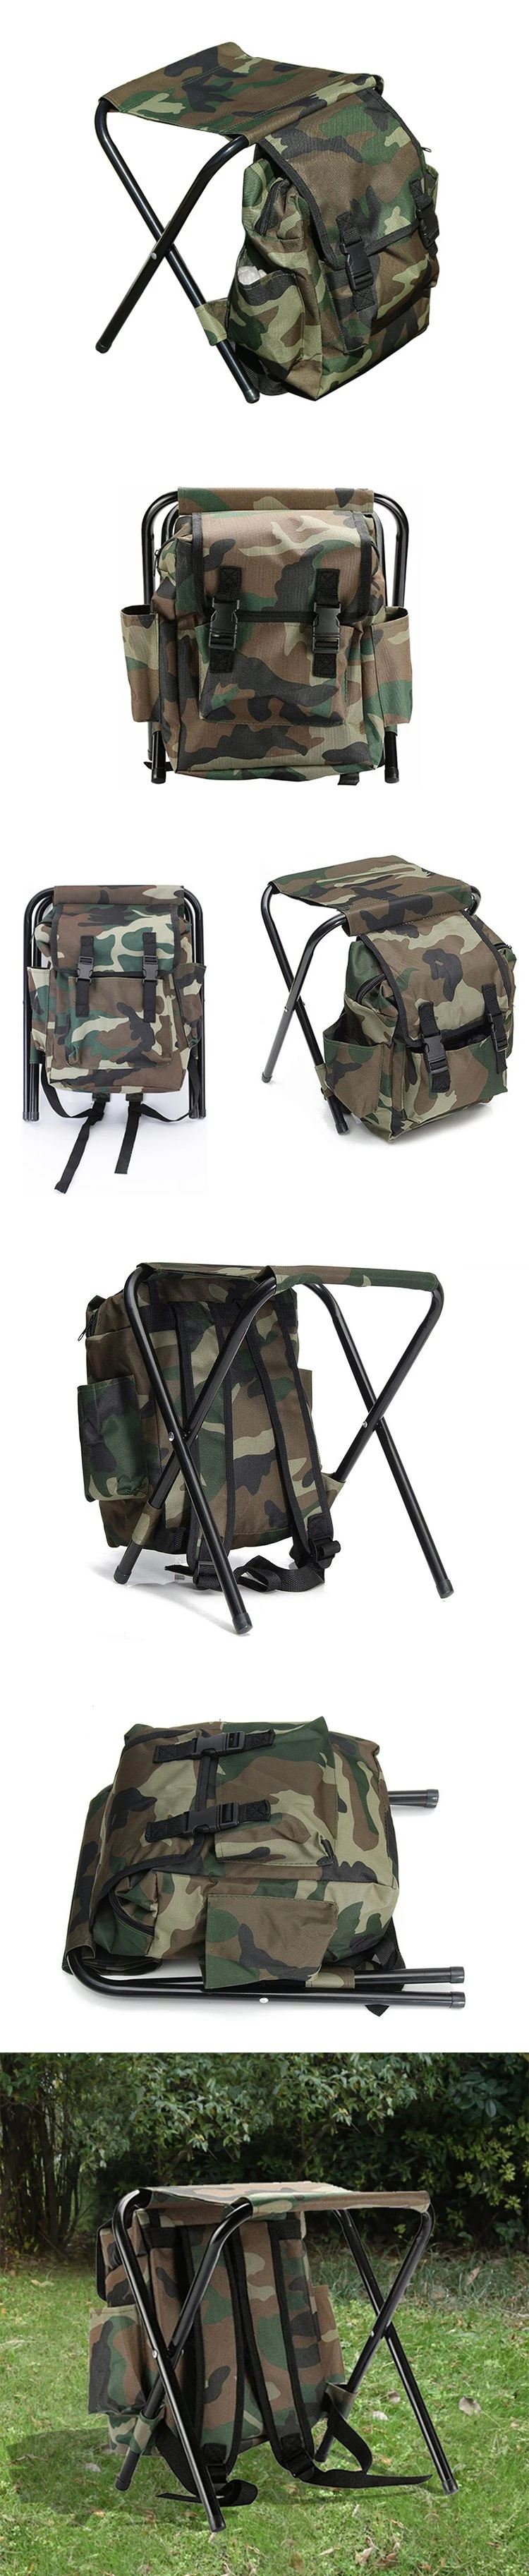 Portable Fish Chair Backpack Ice Bag Camping Chair with Cooler Bag